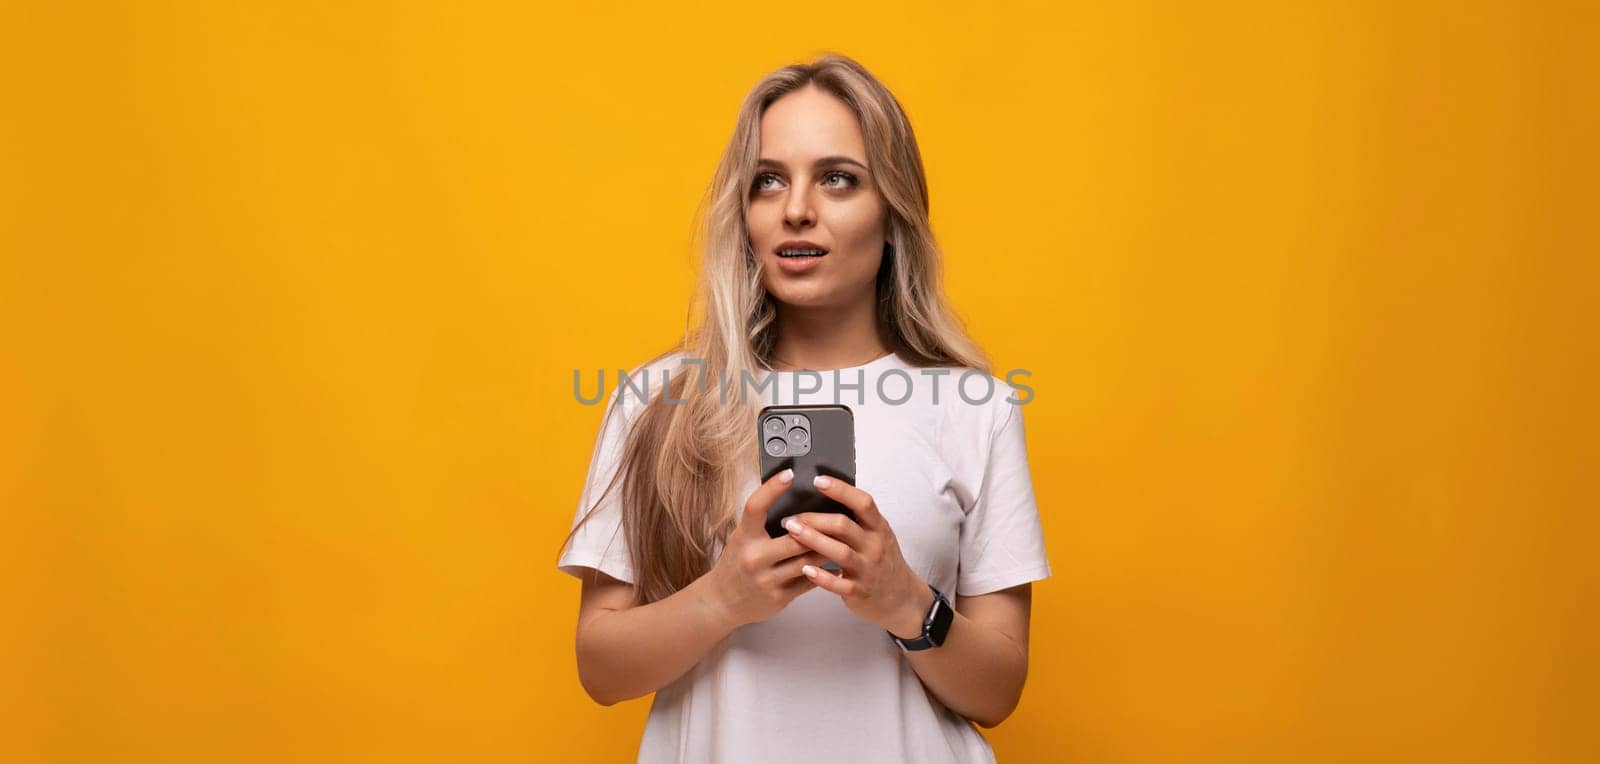 student girl with a phone in her hands on a yellow background.